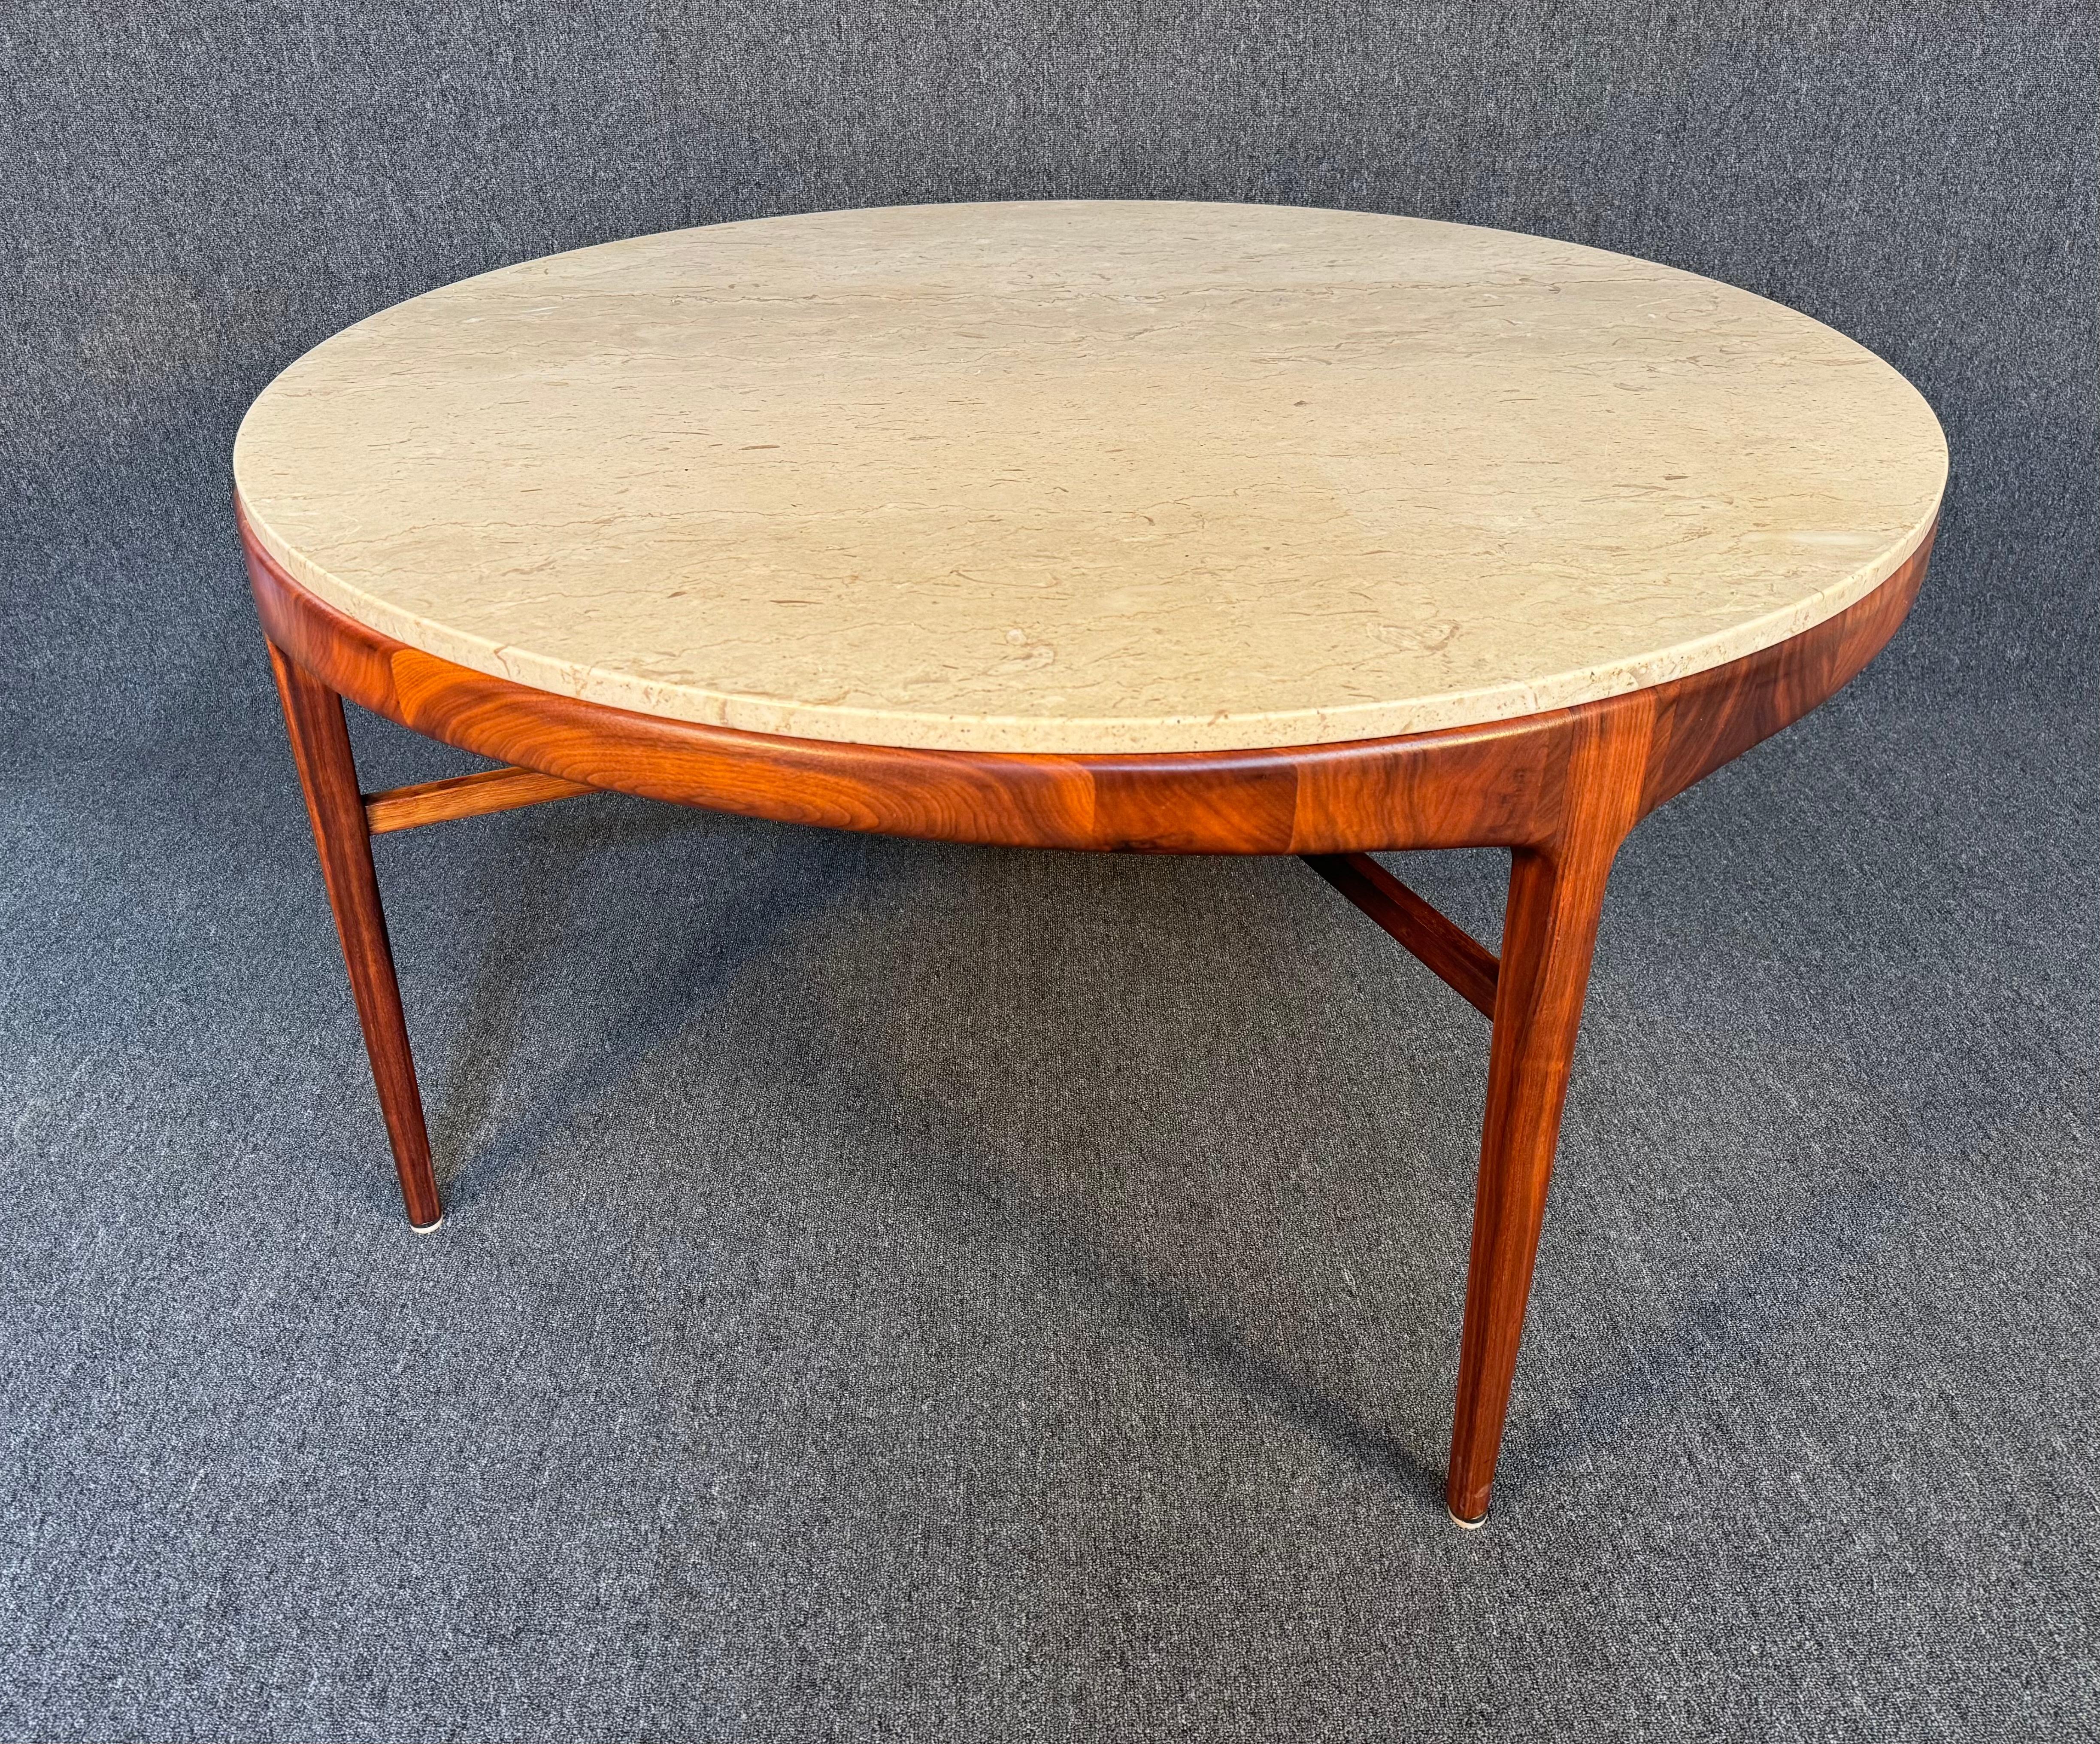 Vintage Mid Century Modern Walnut and Marble Game Table by Lane In Good Condition For Sale In San Marcos, CA